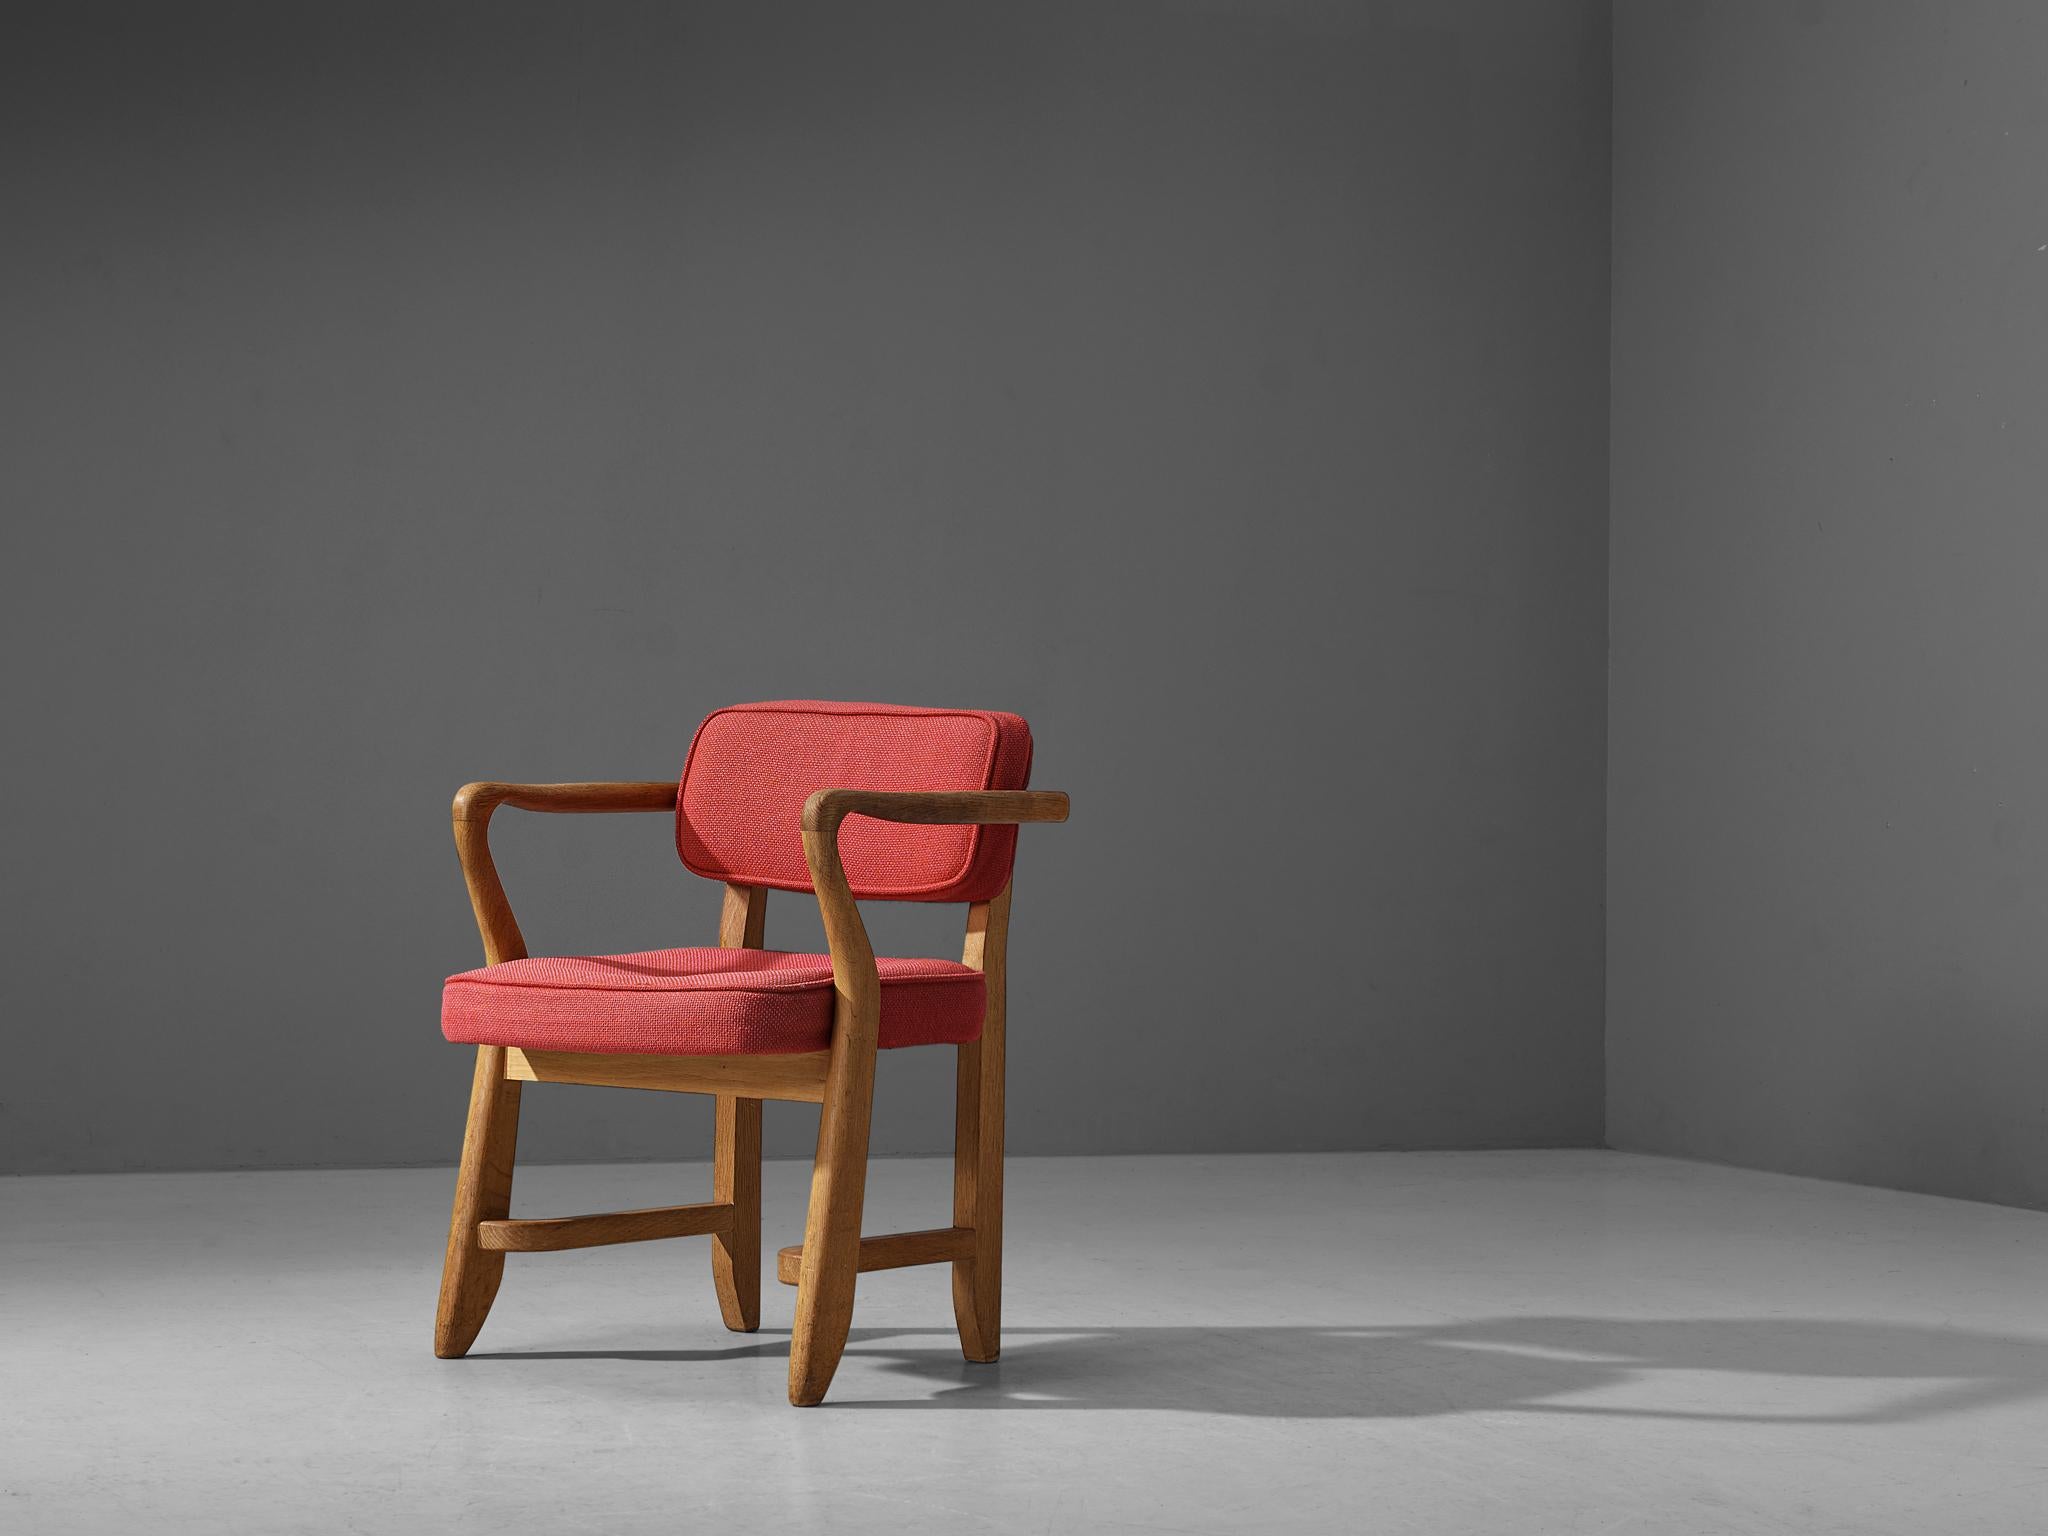 Guillerme & Chambron, 'Denis' armchairs, coral red fabric, oak, France, 1960s

This sculptural easy chair is designed by Guillerme & Chambron. The duo is known for their high quality solid oak furniture. The sculptural armchair has an interesting